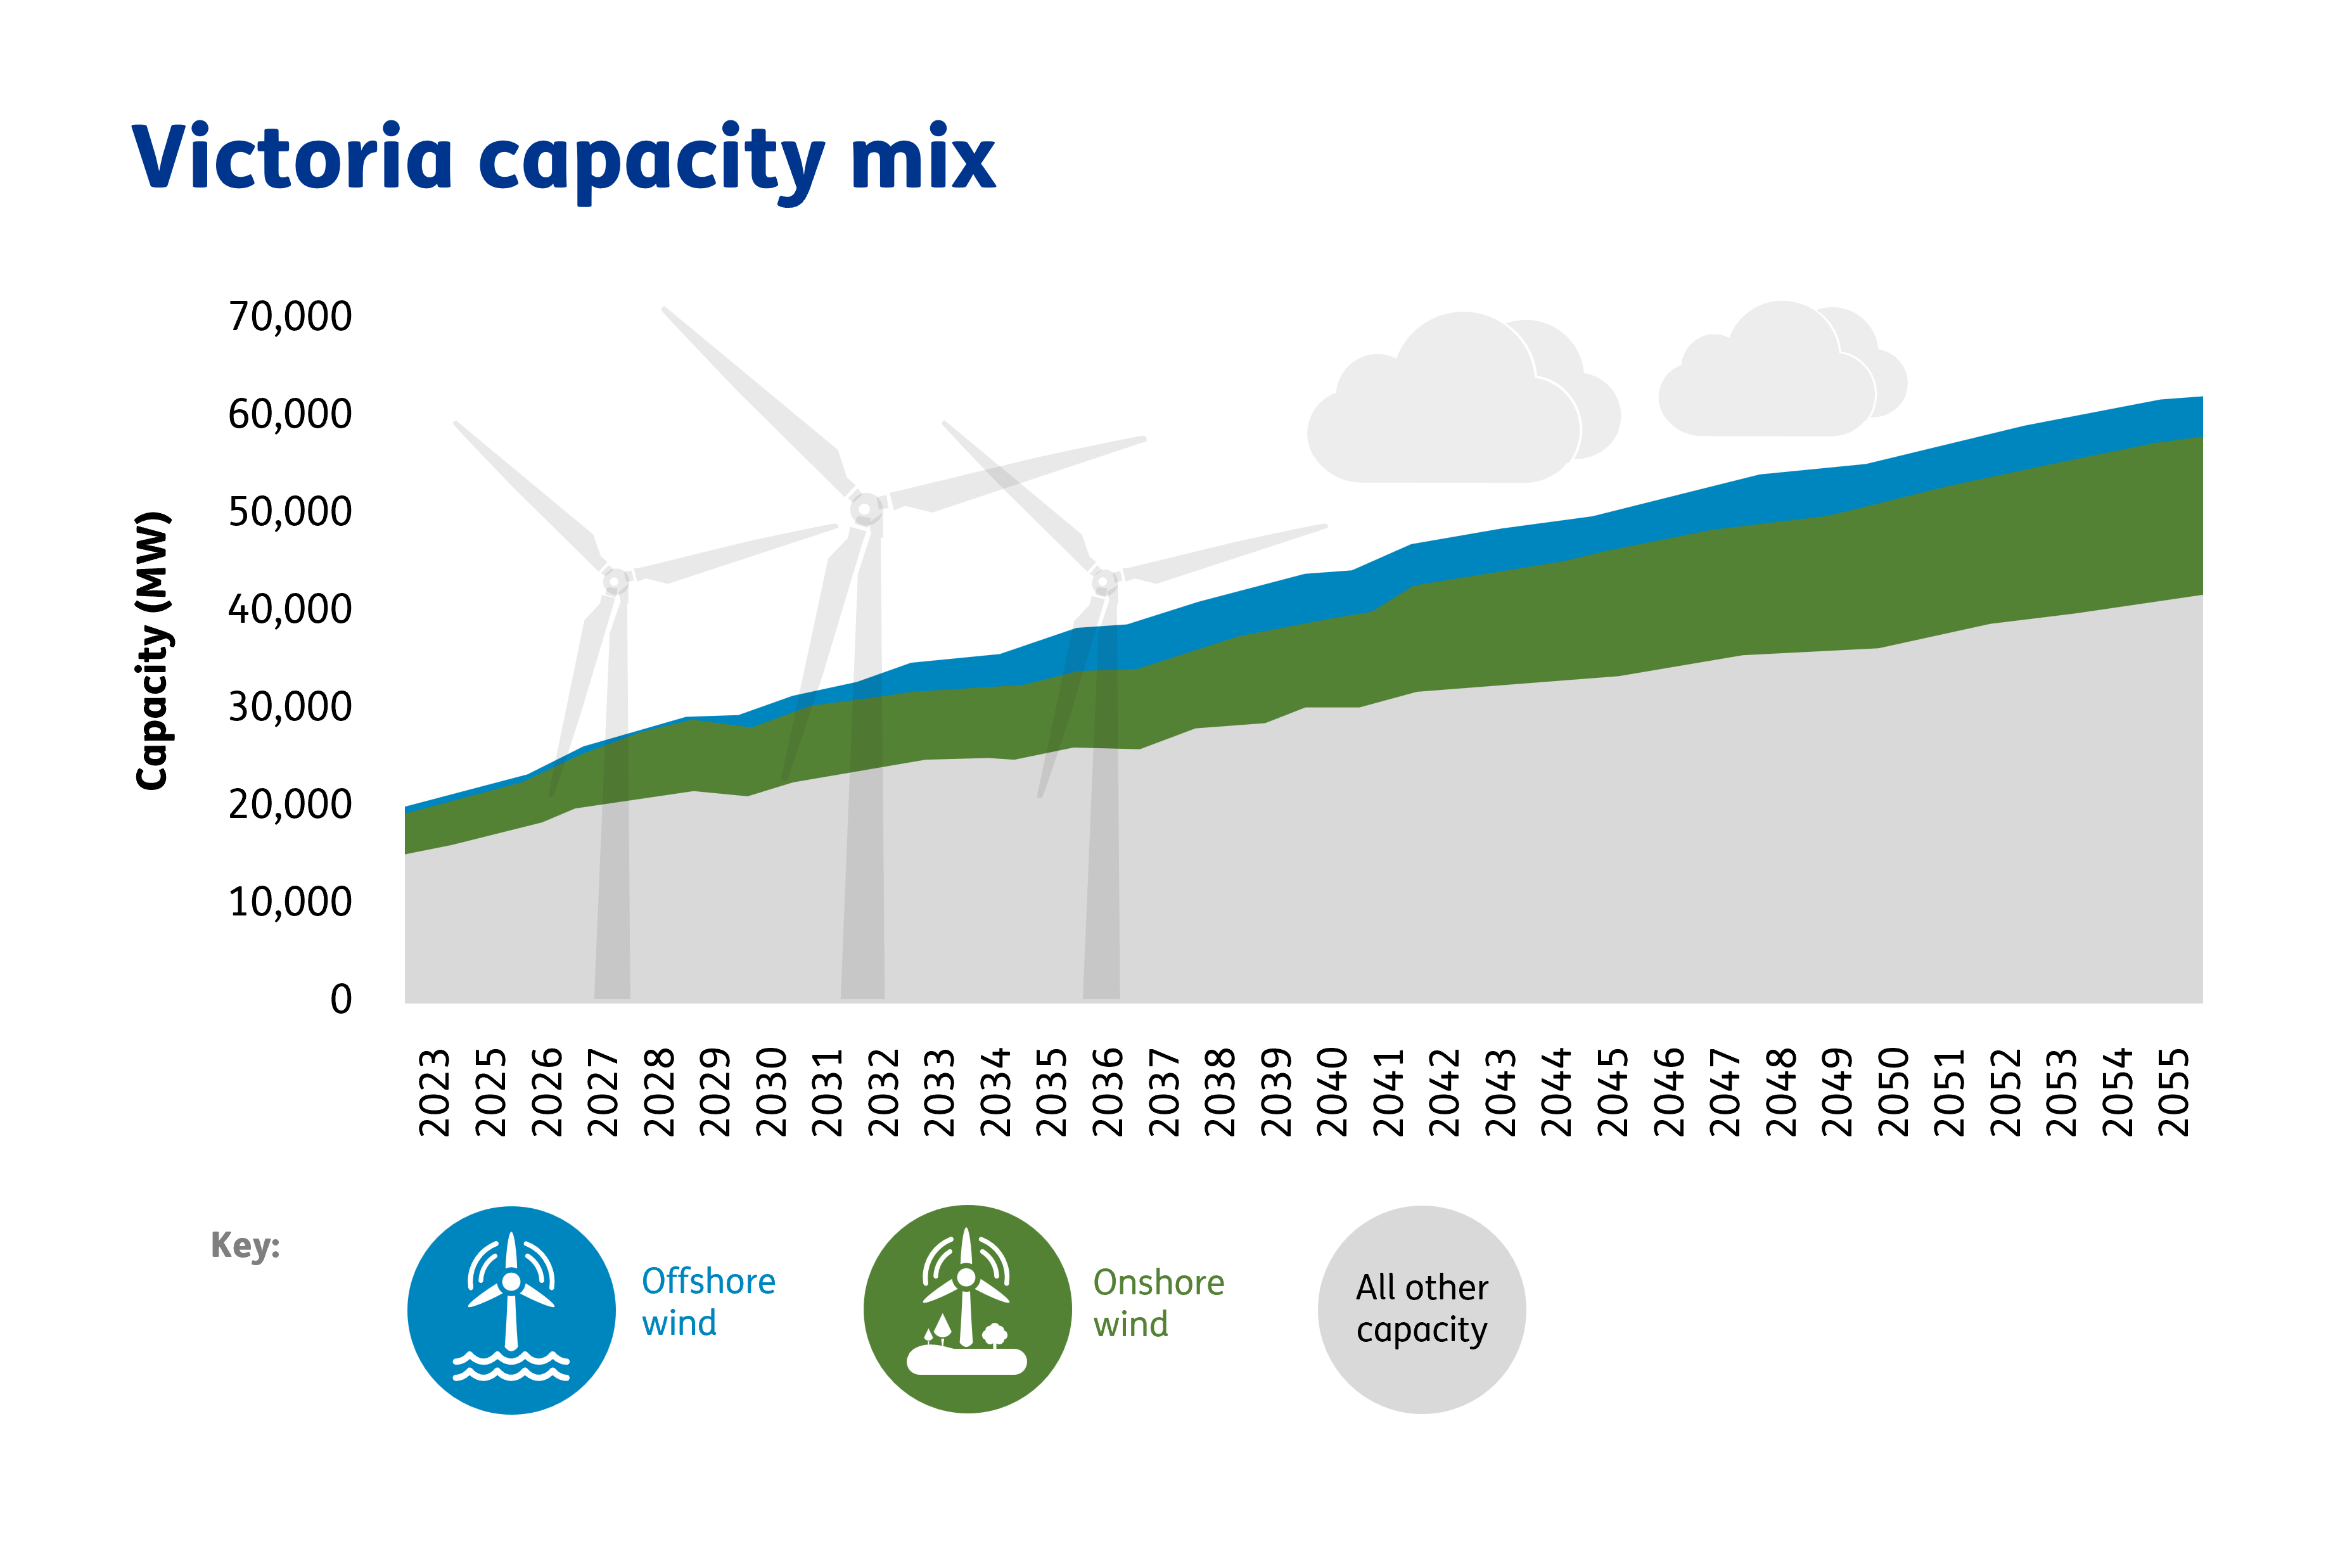 Chart showing the Victoria capacity mix